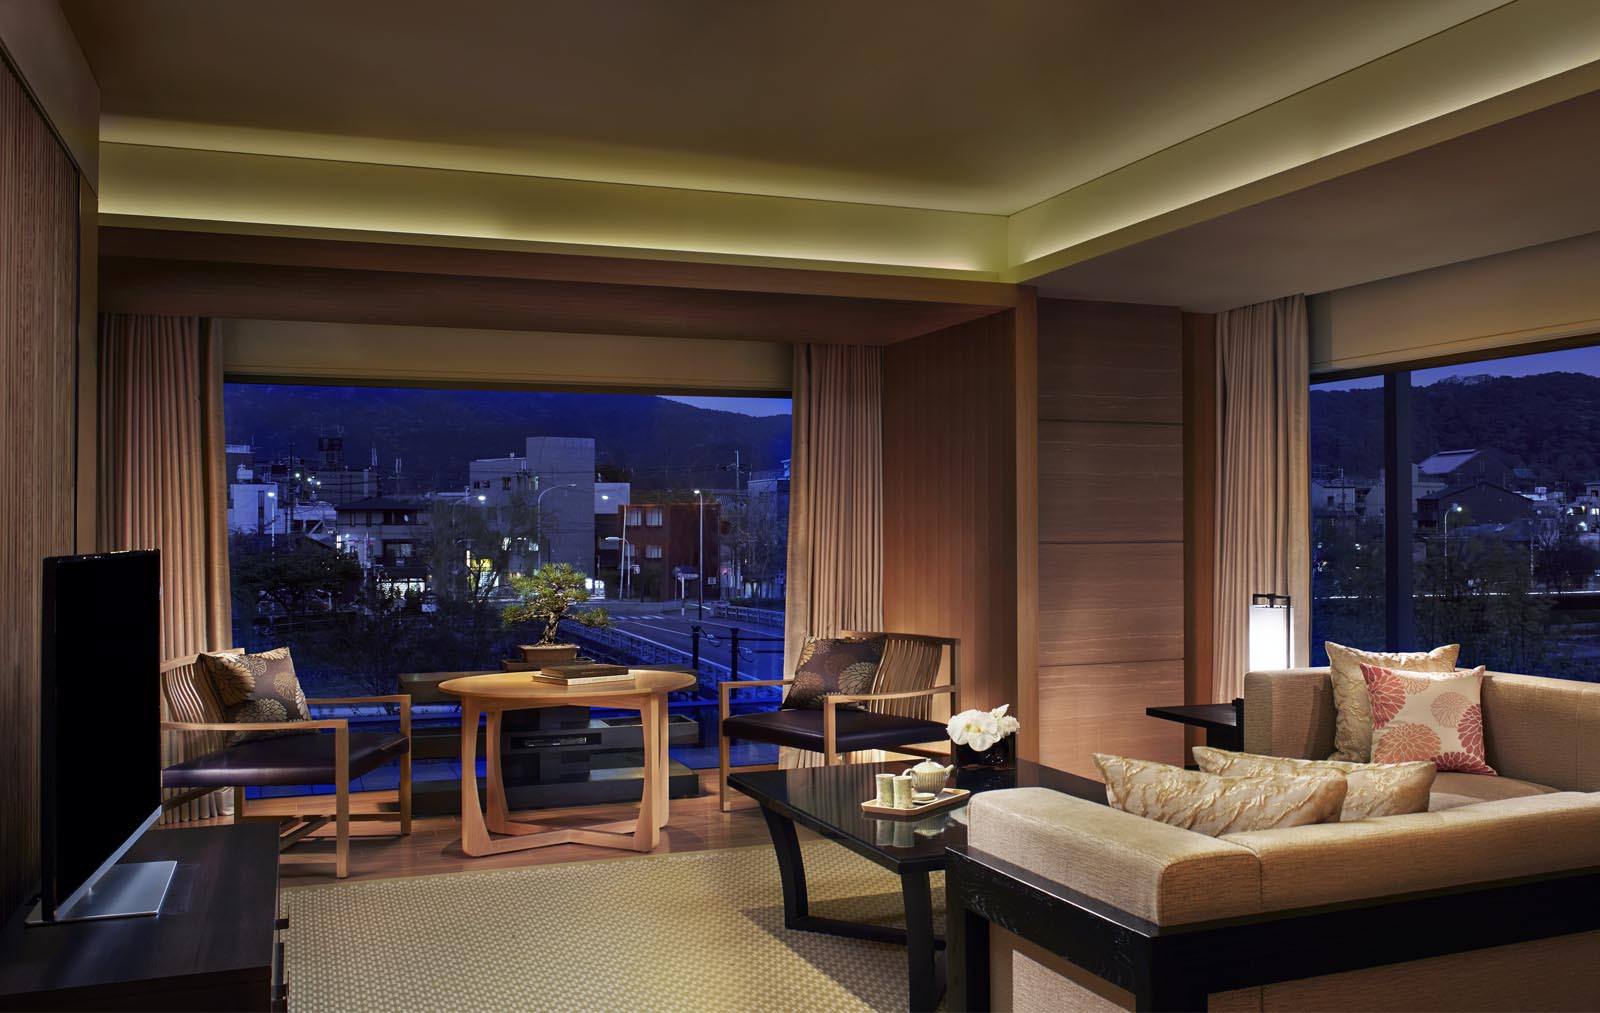 Corner Suite Minami at The Ritz-Carlton, one of the best hotels in Kyoto, offers splendid views of the Kamogawa River and the historic city